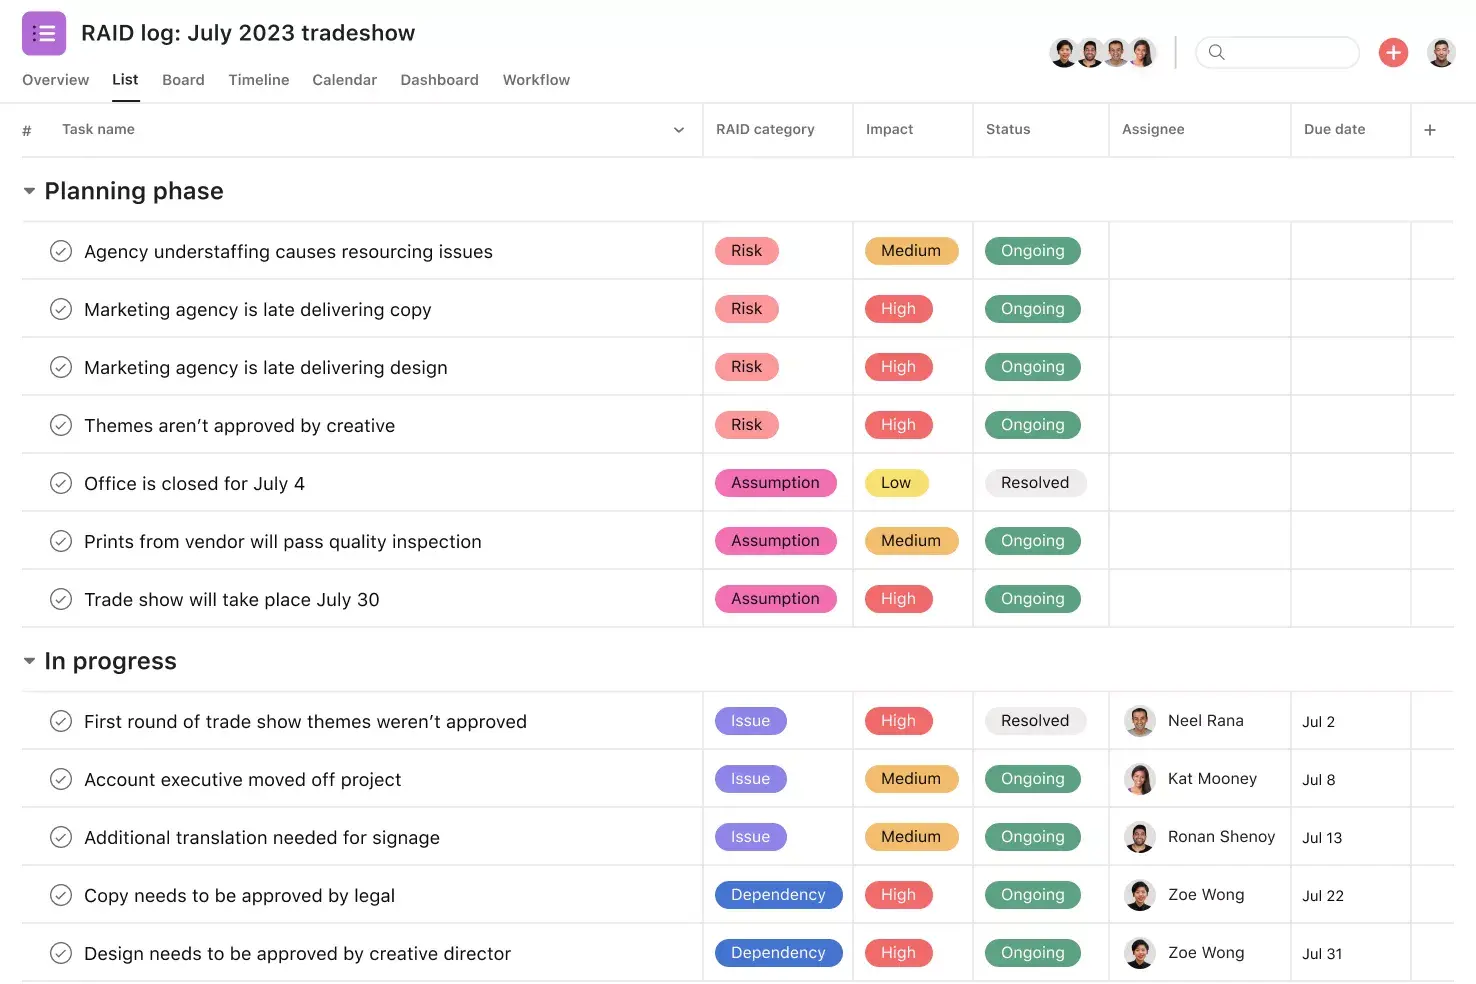 [Product ui] Raid log project in Asana, spreadsheet-style project view (list)